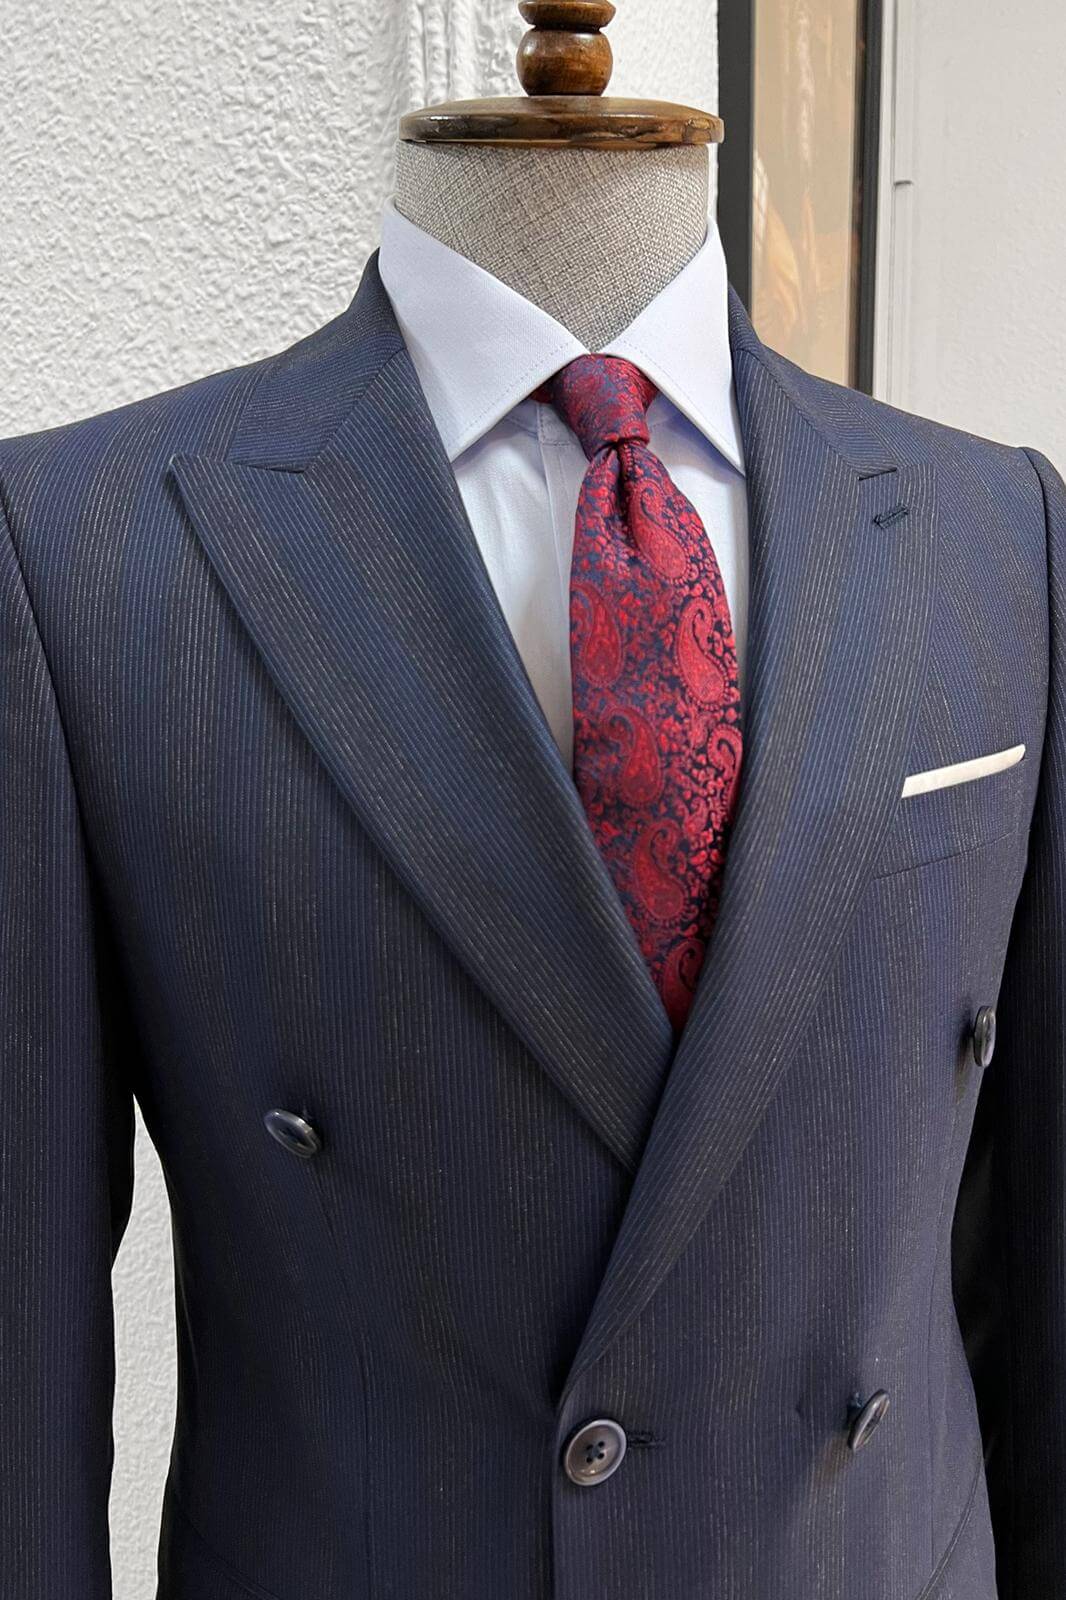 A Striped- Navy-blue- wool suit on display